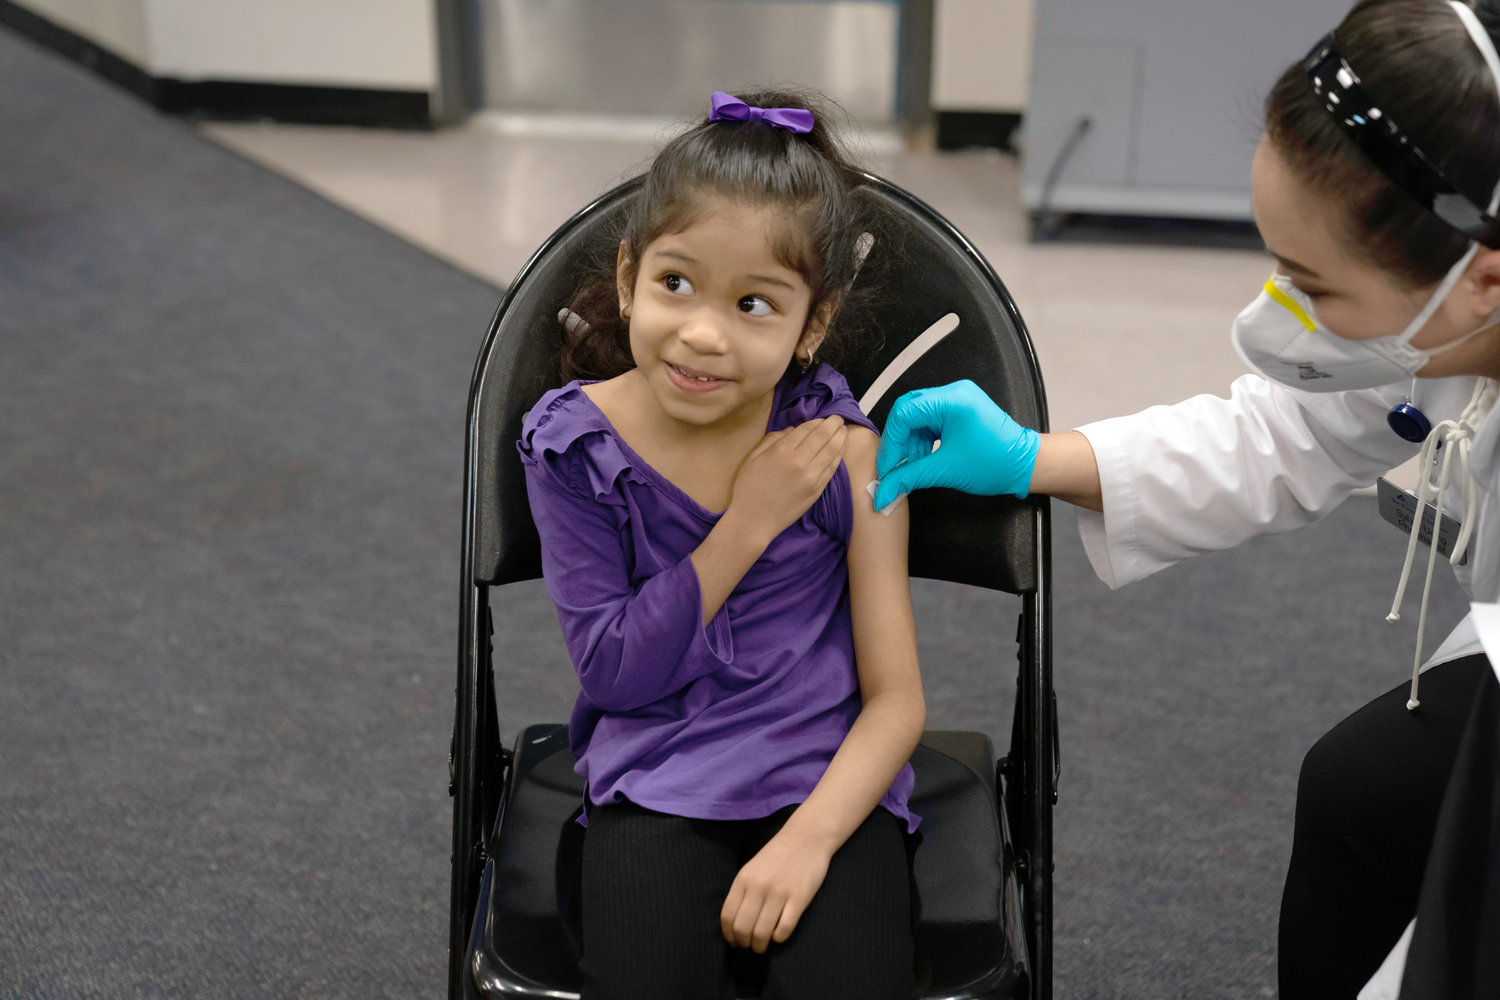 FIRST SHOT — Elsa Estrada, 6, smiles at her mother as pharmacist Sylvia Uong applies an alcohol swab to her arm before administering the Pfizer COVID-19 vaccine at a pediatric vaccine clinic for children ages 5 to 11 set up at Willard Intermediate School in Santa Ana, Calif.